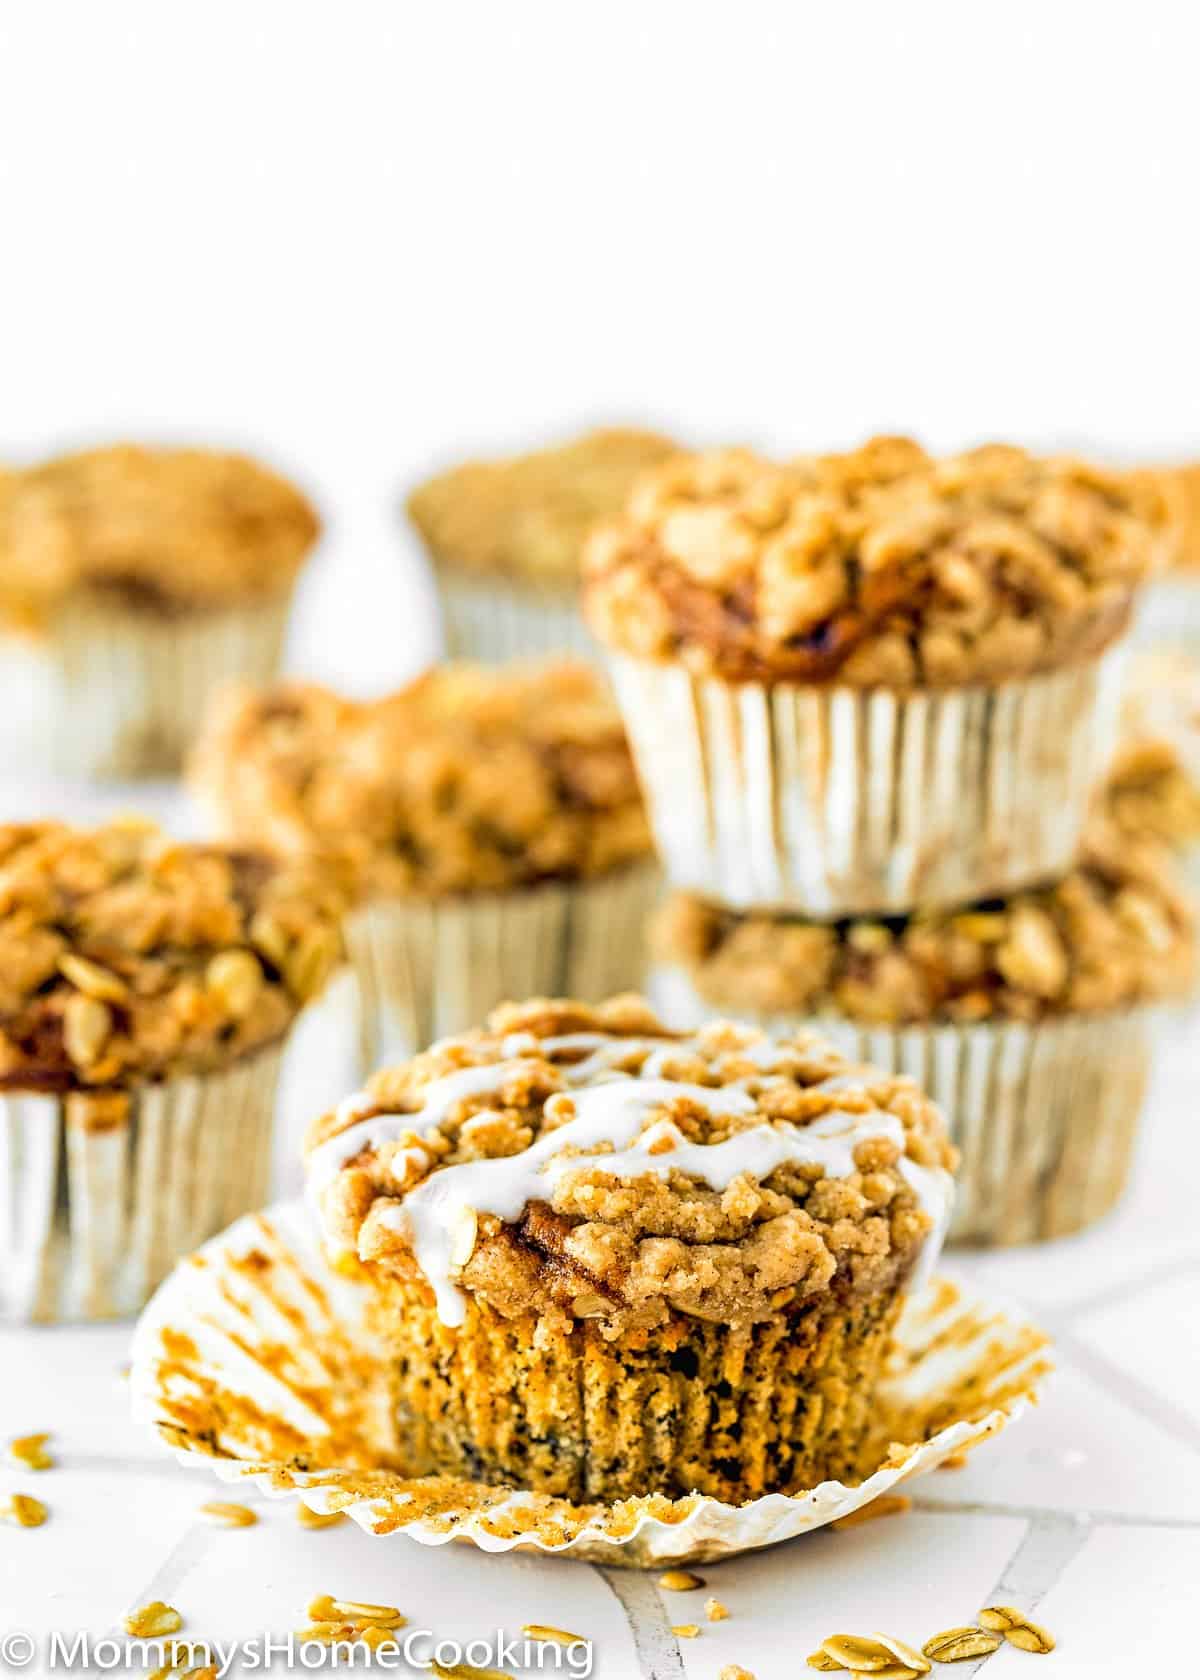 Eggless Banana Crumb Muffins with sugar glaze over a white surface